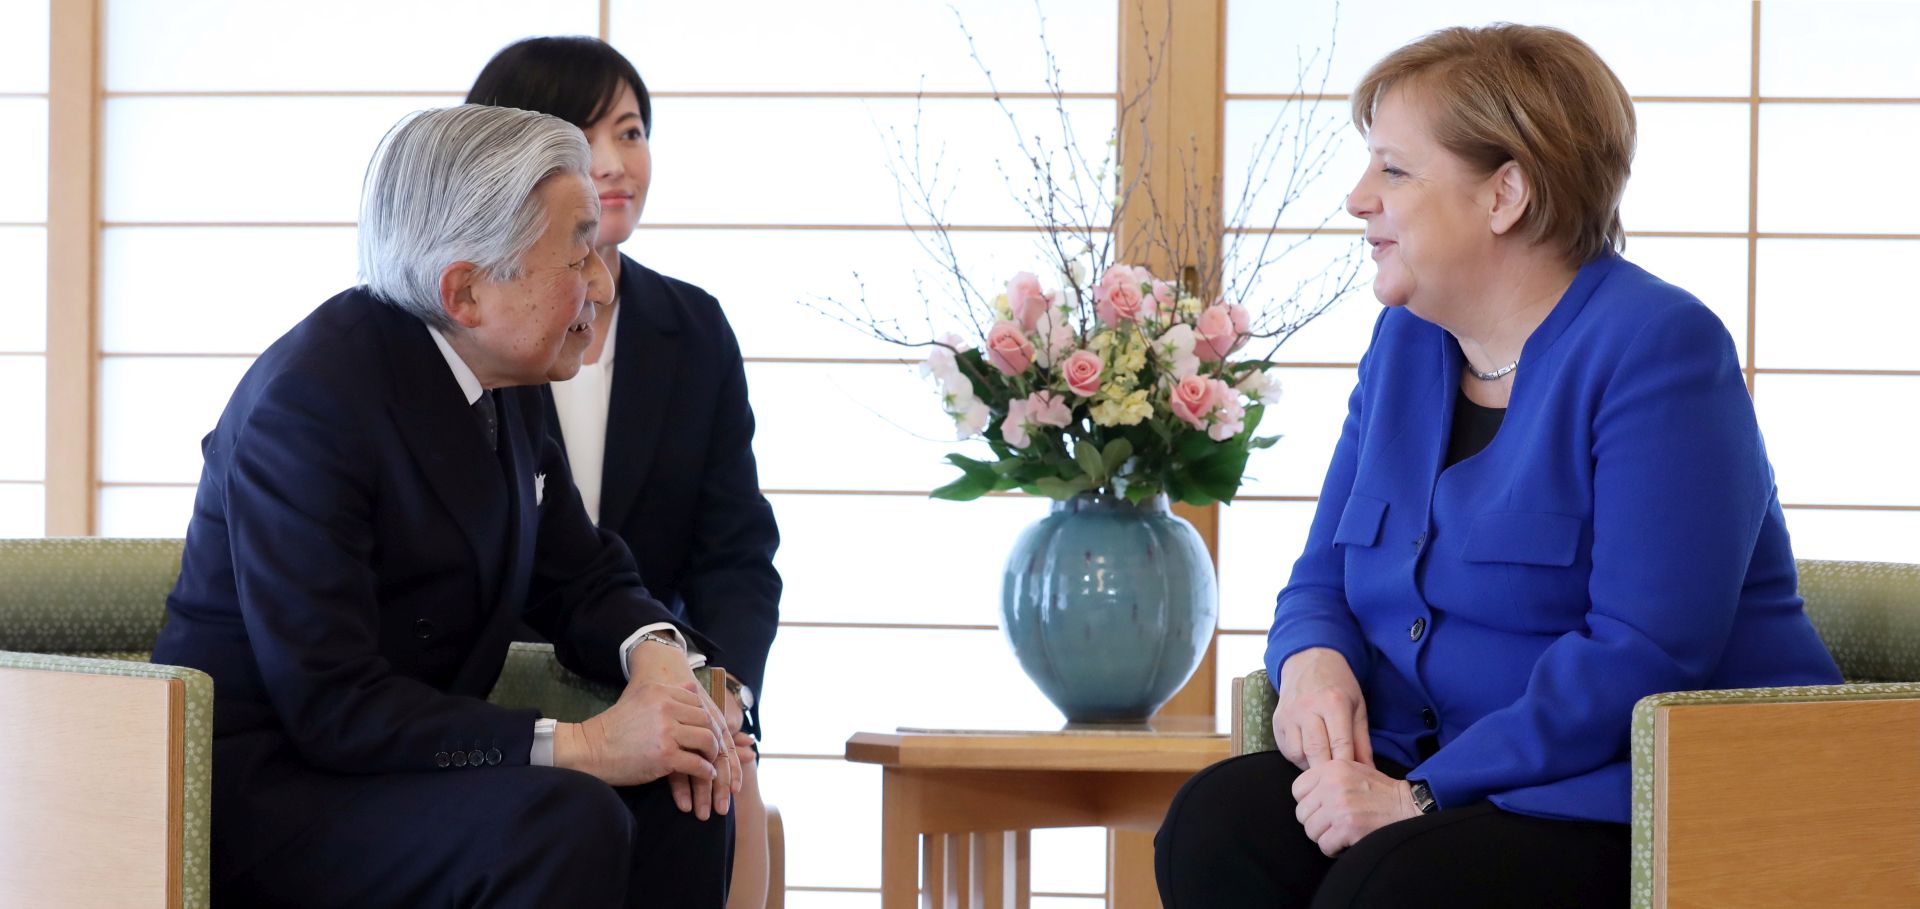 epa07344342 German Chancellor Angela Merkel (R) meets Japanese Emperor Akihito (L) at the Imperial Palace in Tokyo, Japan, 05 February 2019. Merkel is currently on a two-day official visit to Japan.  EPA/JIJI PRESS JAPAN OUT EDITORIAL USE ONLY/  NO ARCHIVES